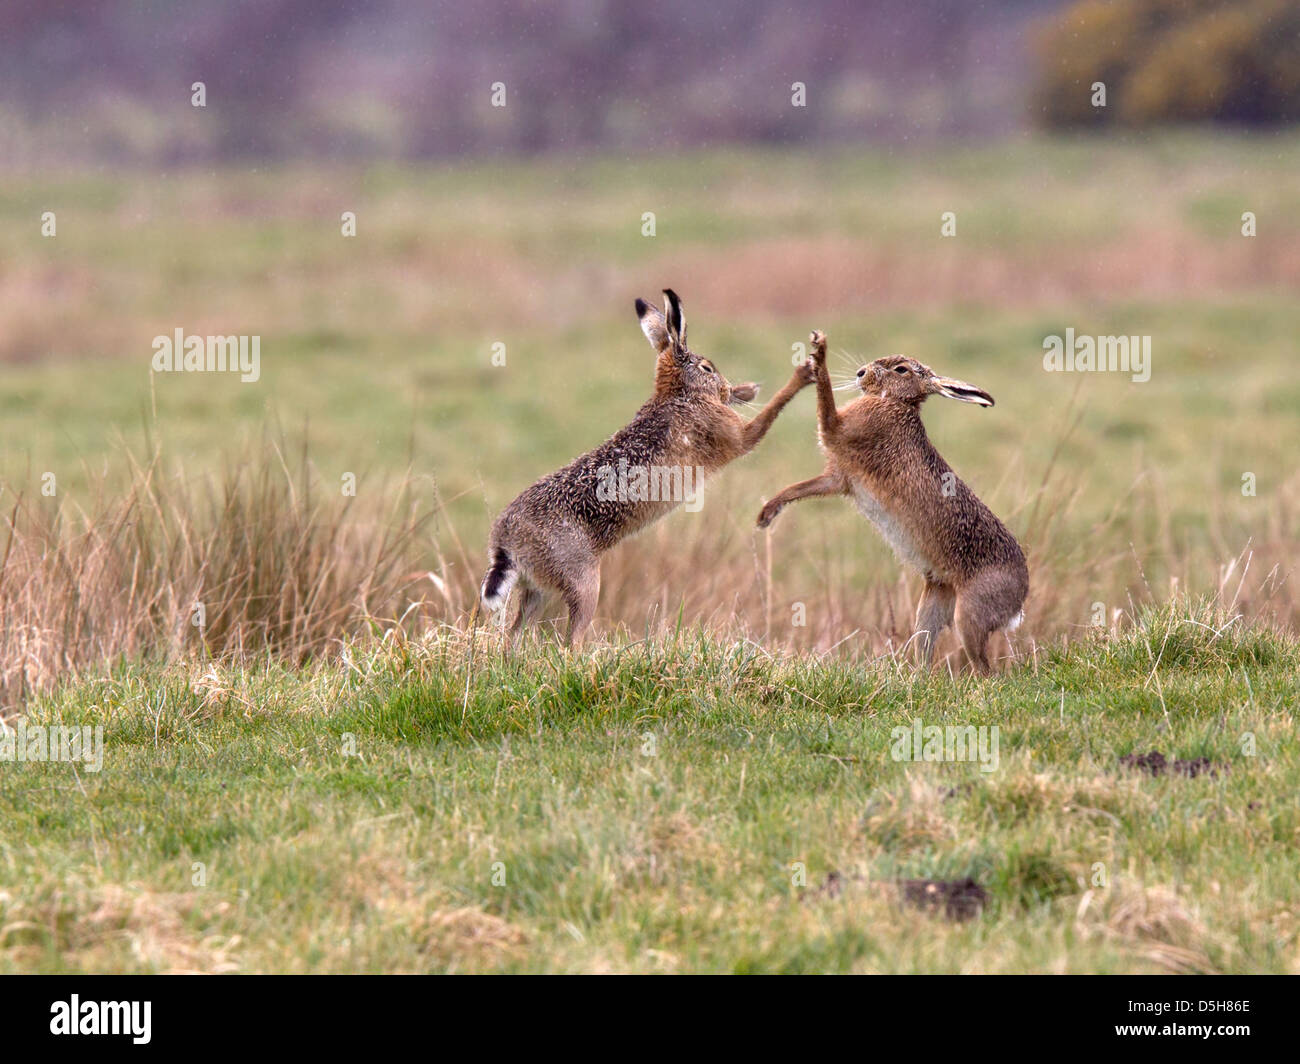 European brown hare boxing Banque D'Images